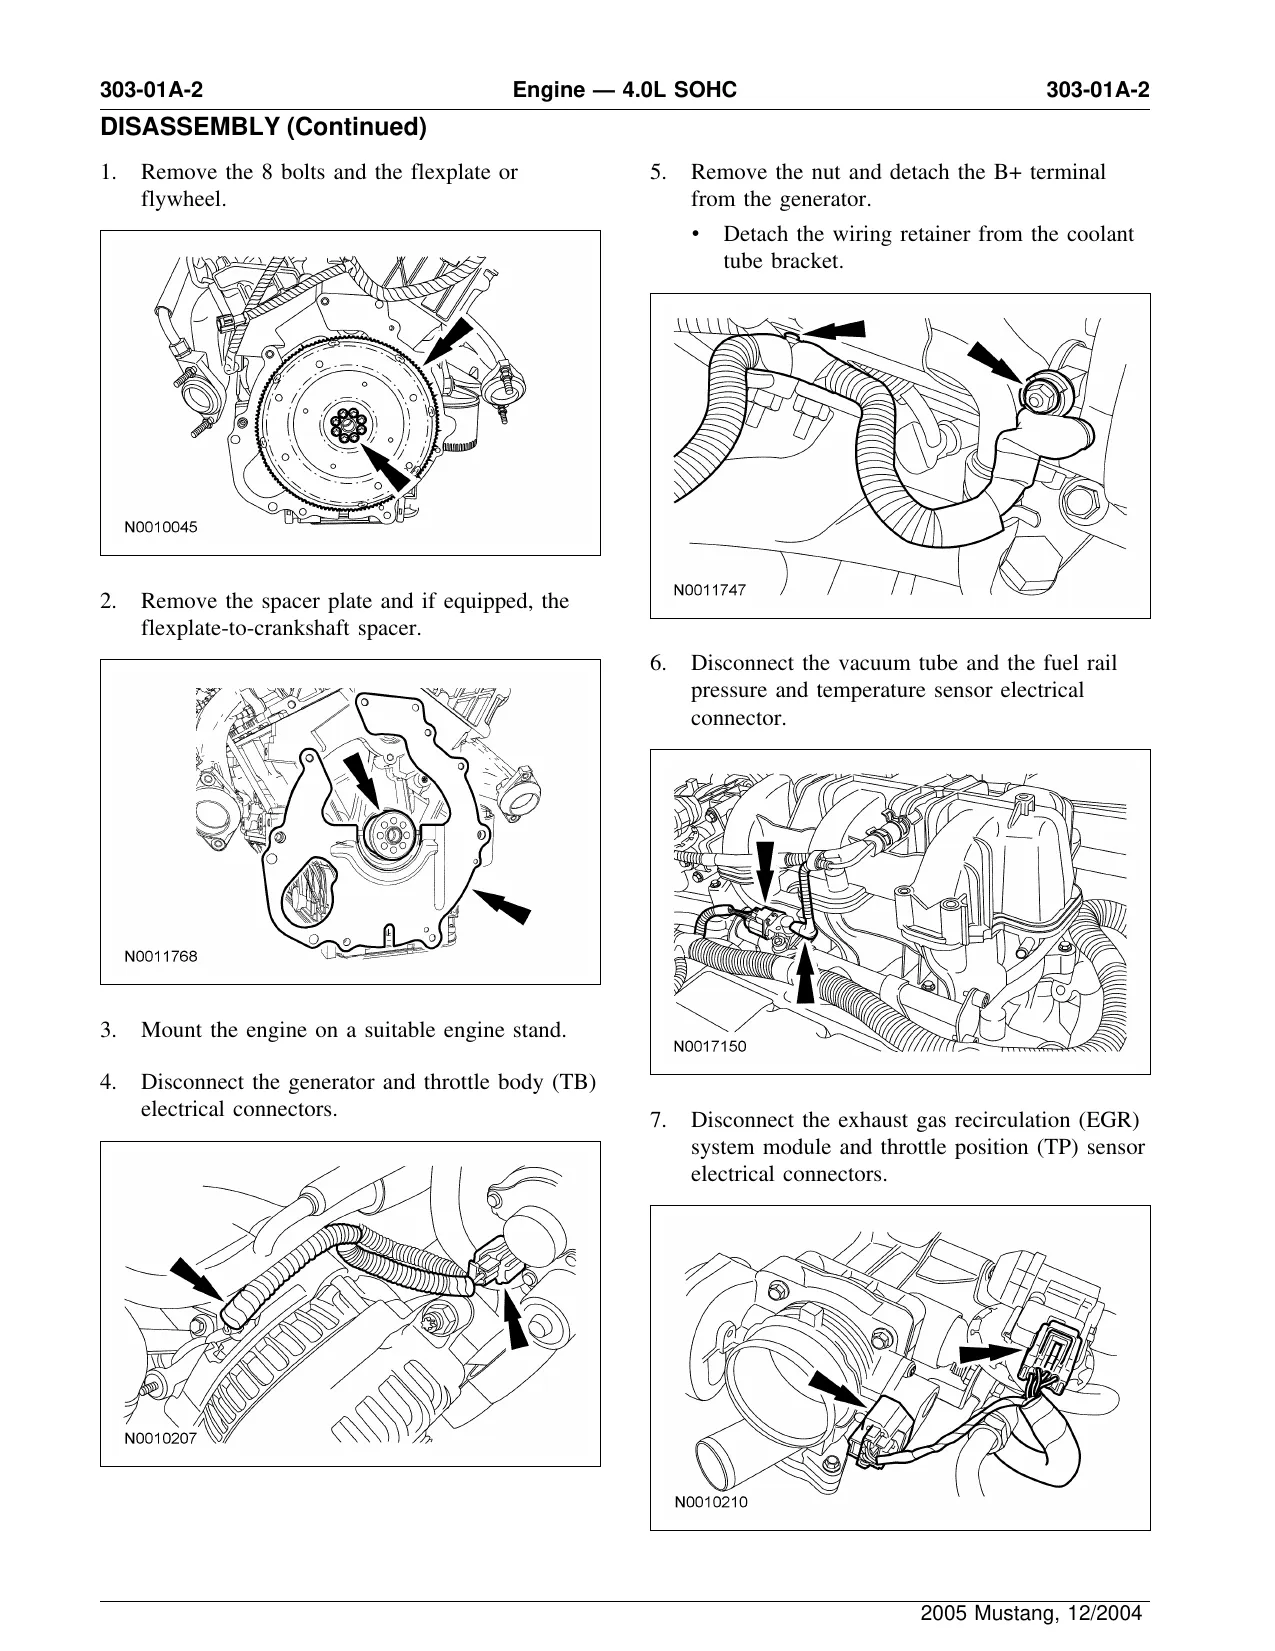 2005-2010 Ford Mustang service manual Preview image 2